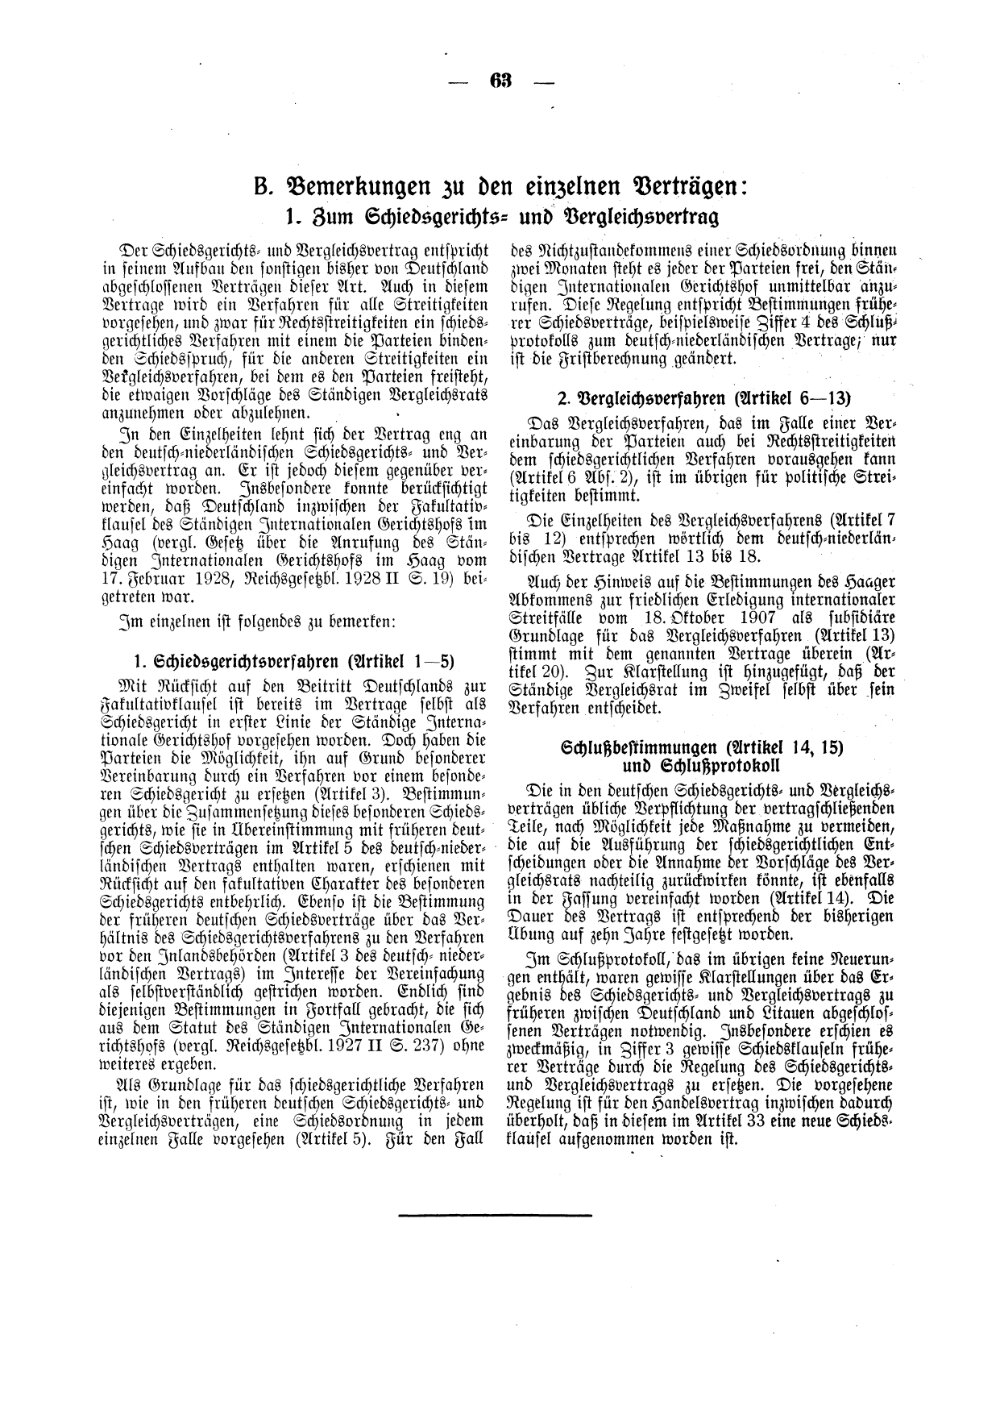 Scan of page 63